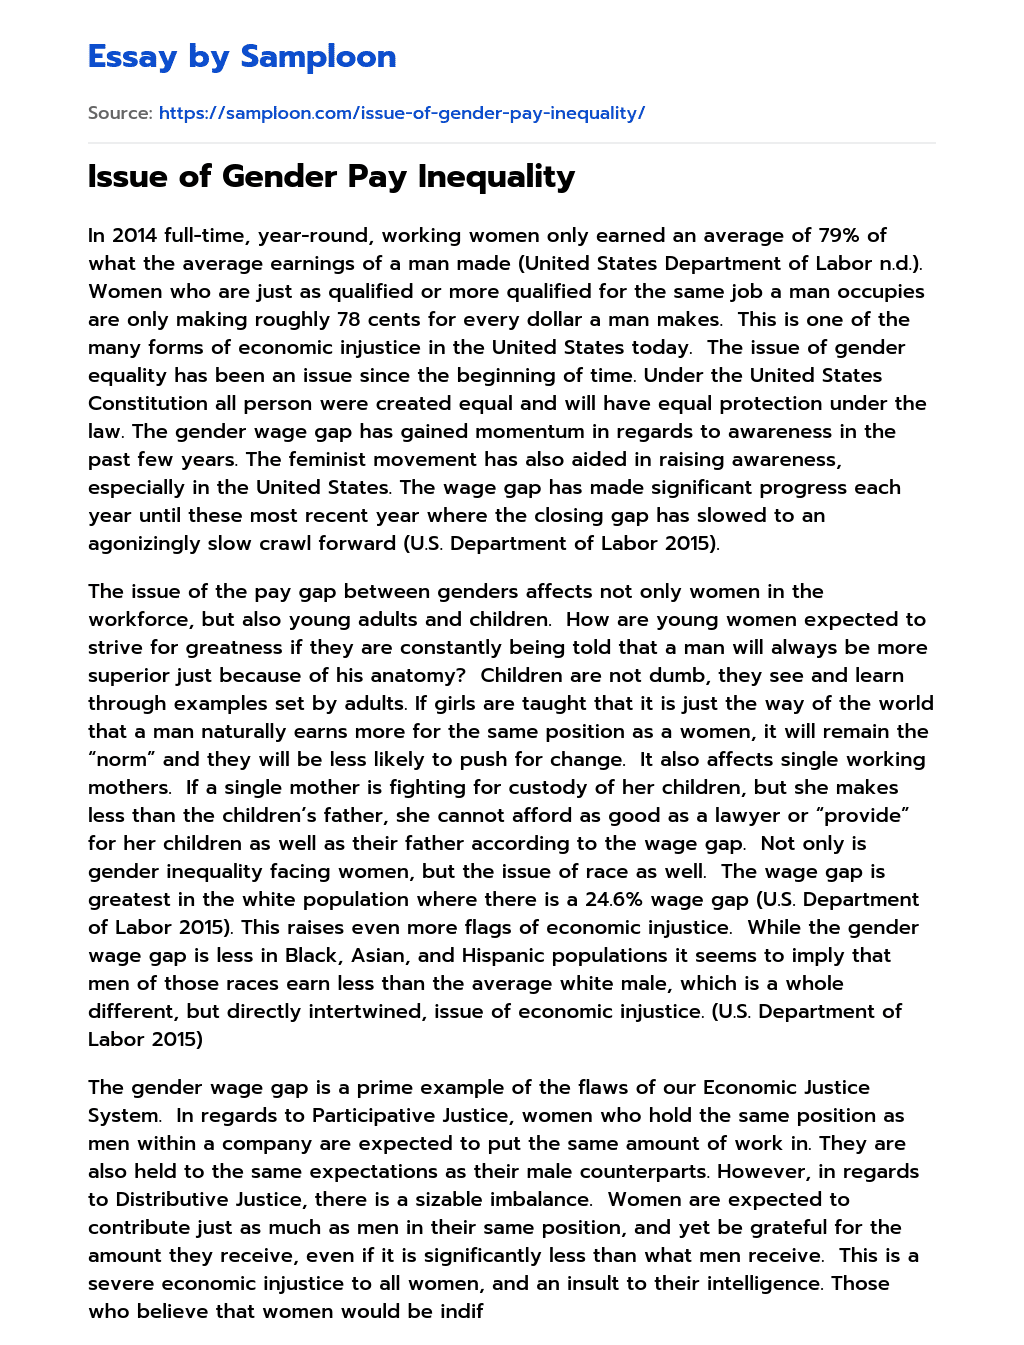 Issue of Gender Pay Inequality essay